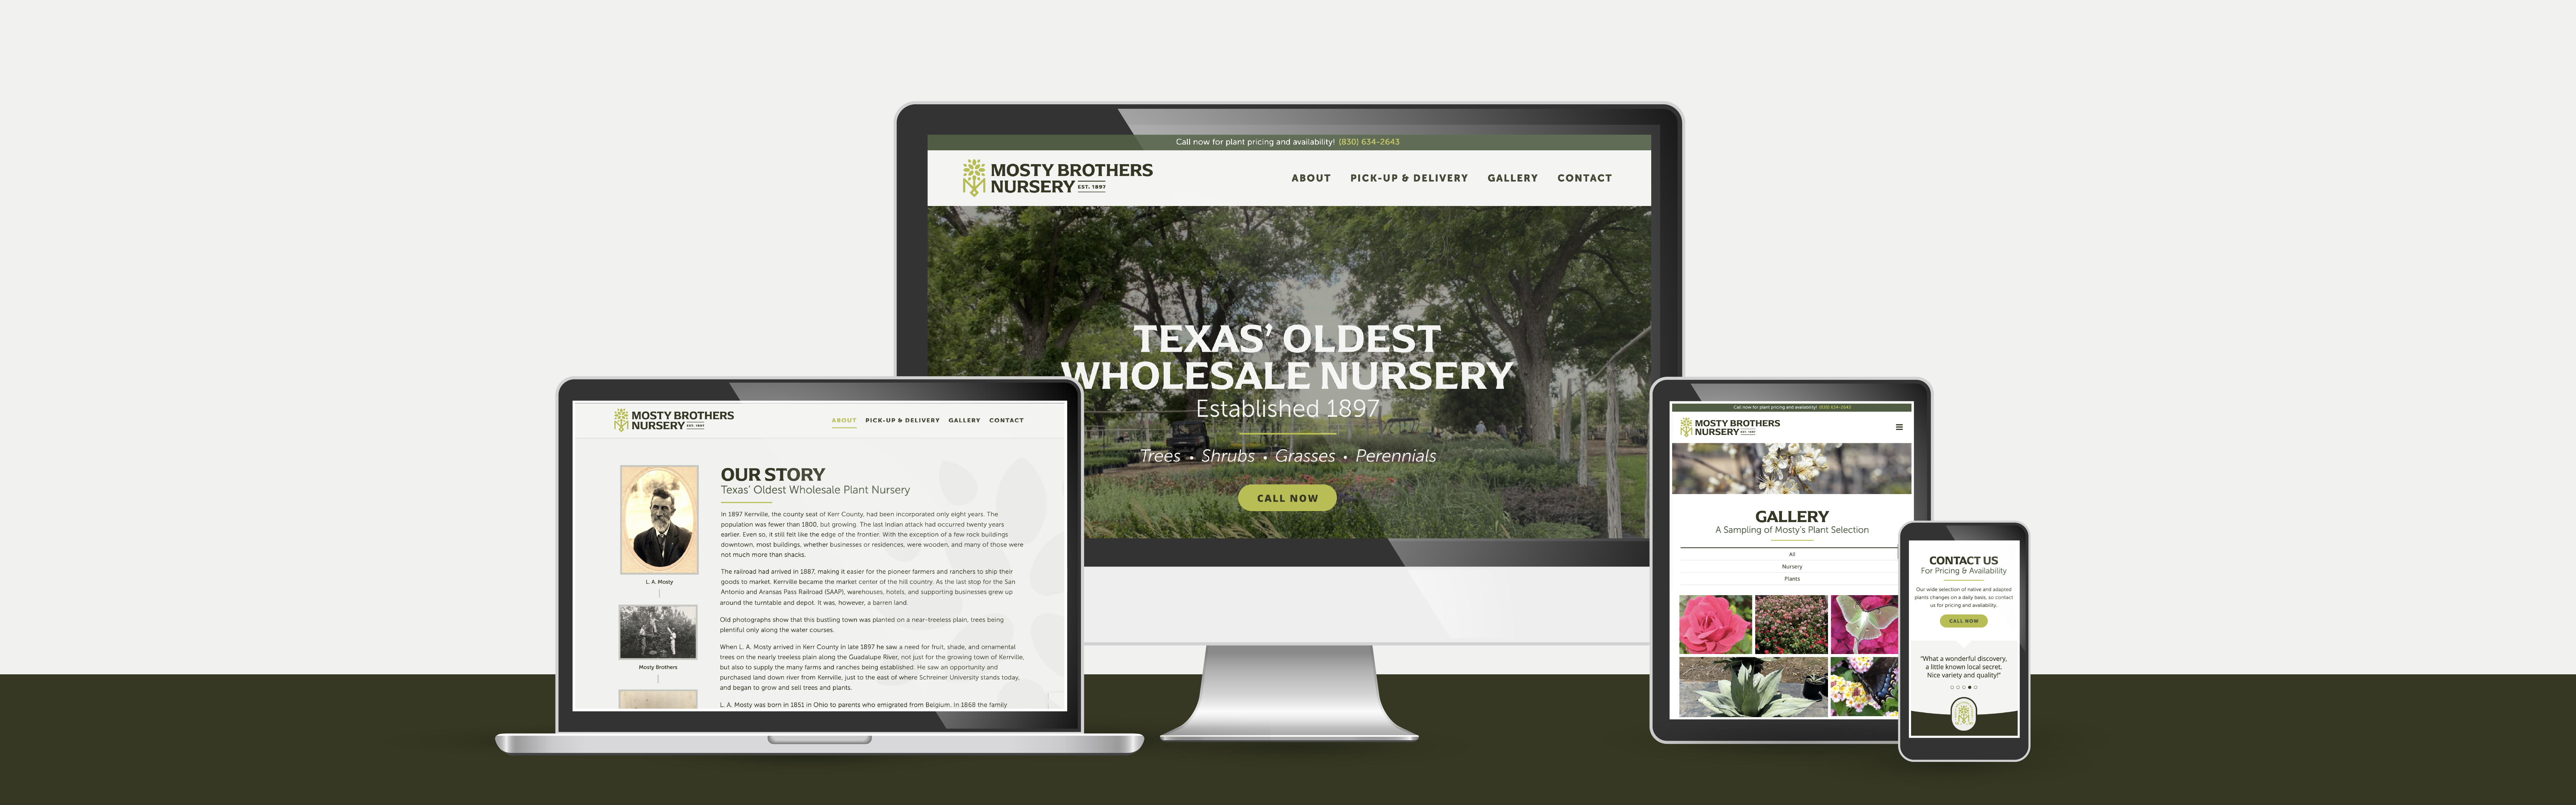 Responsive website design displayed across multiple devices, showcasing Mosty Brothers Nursery business.